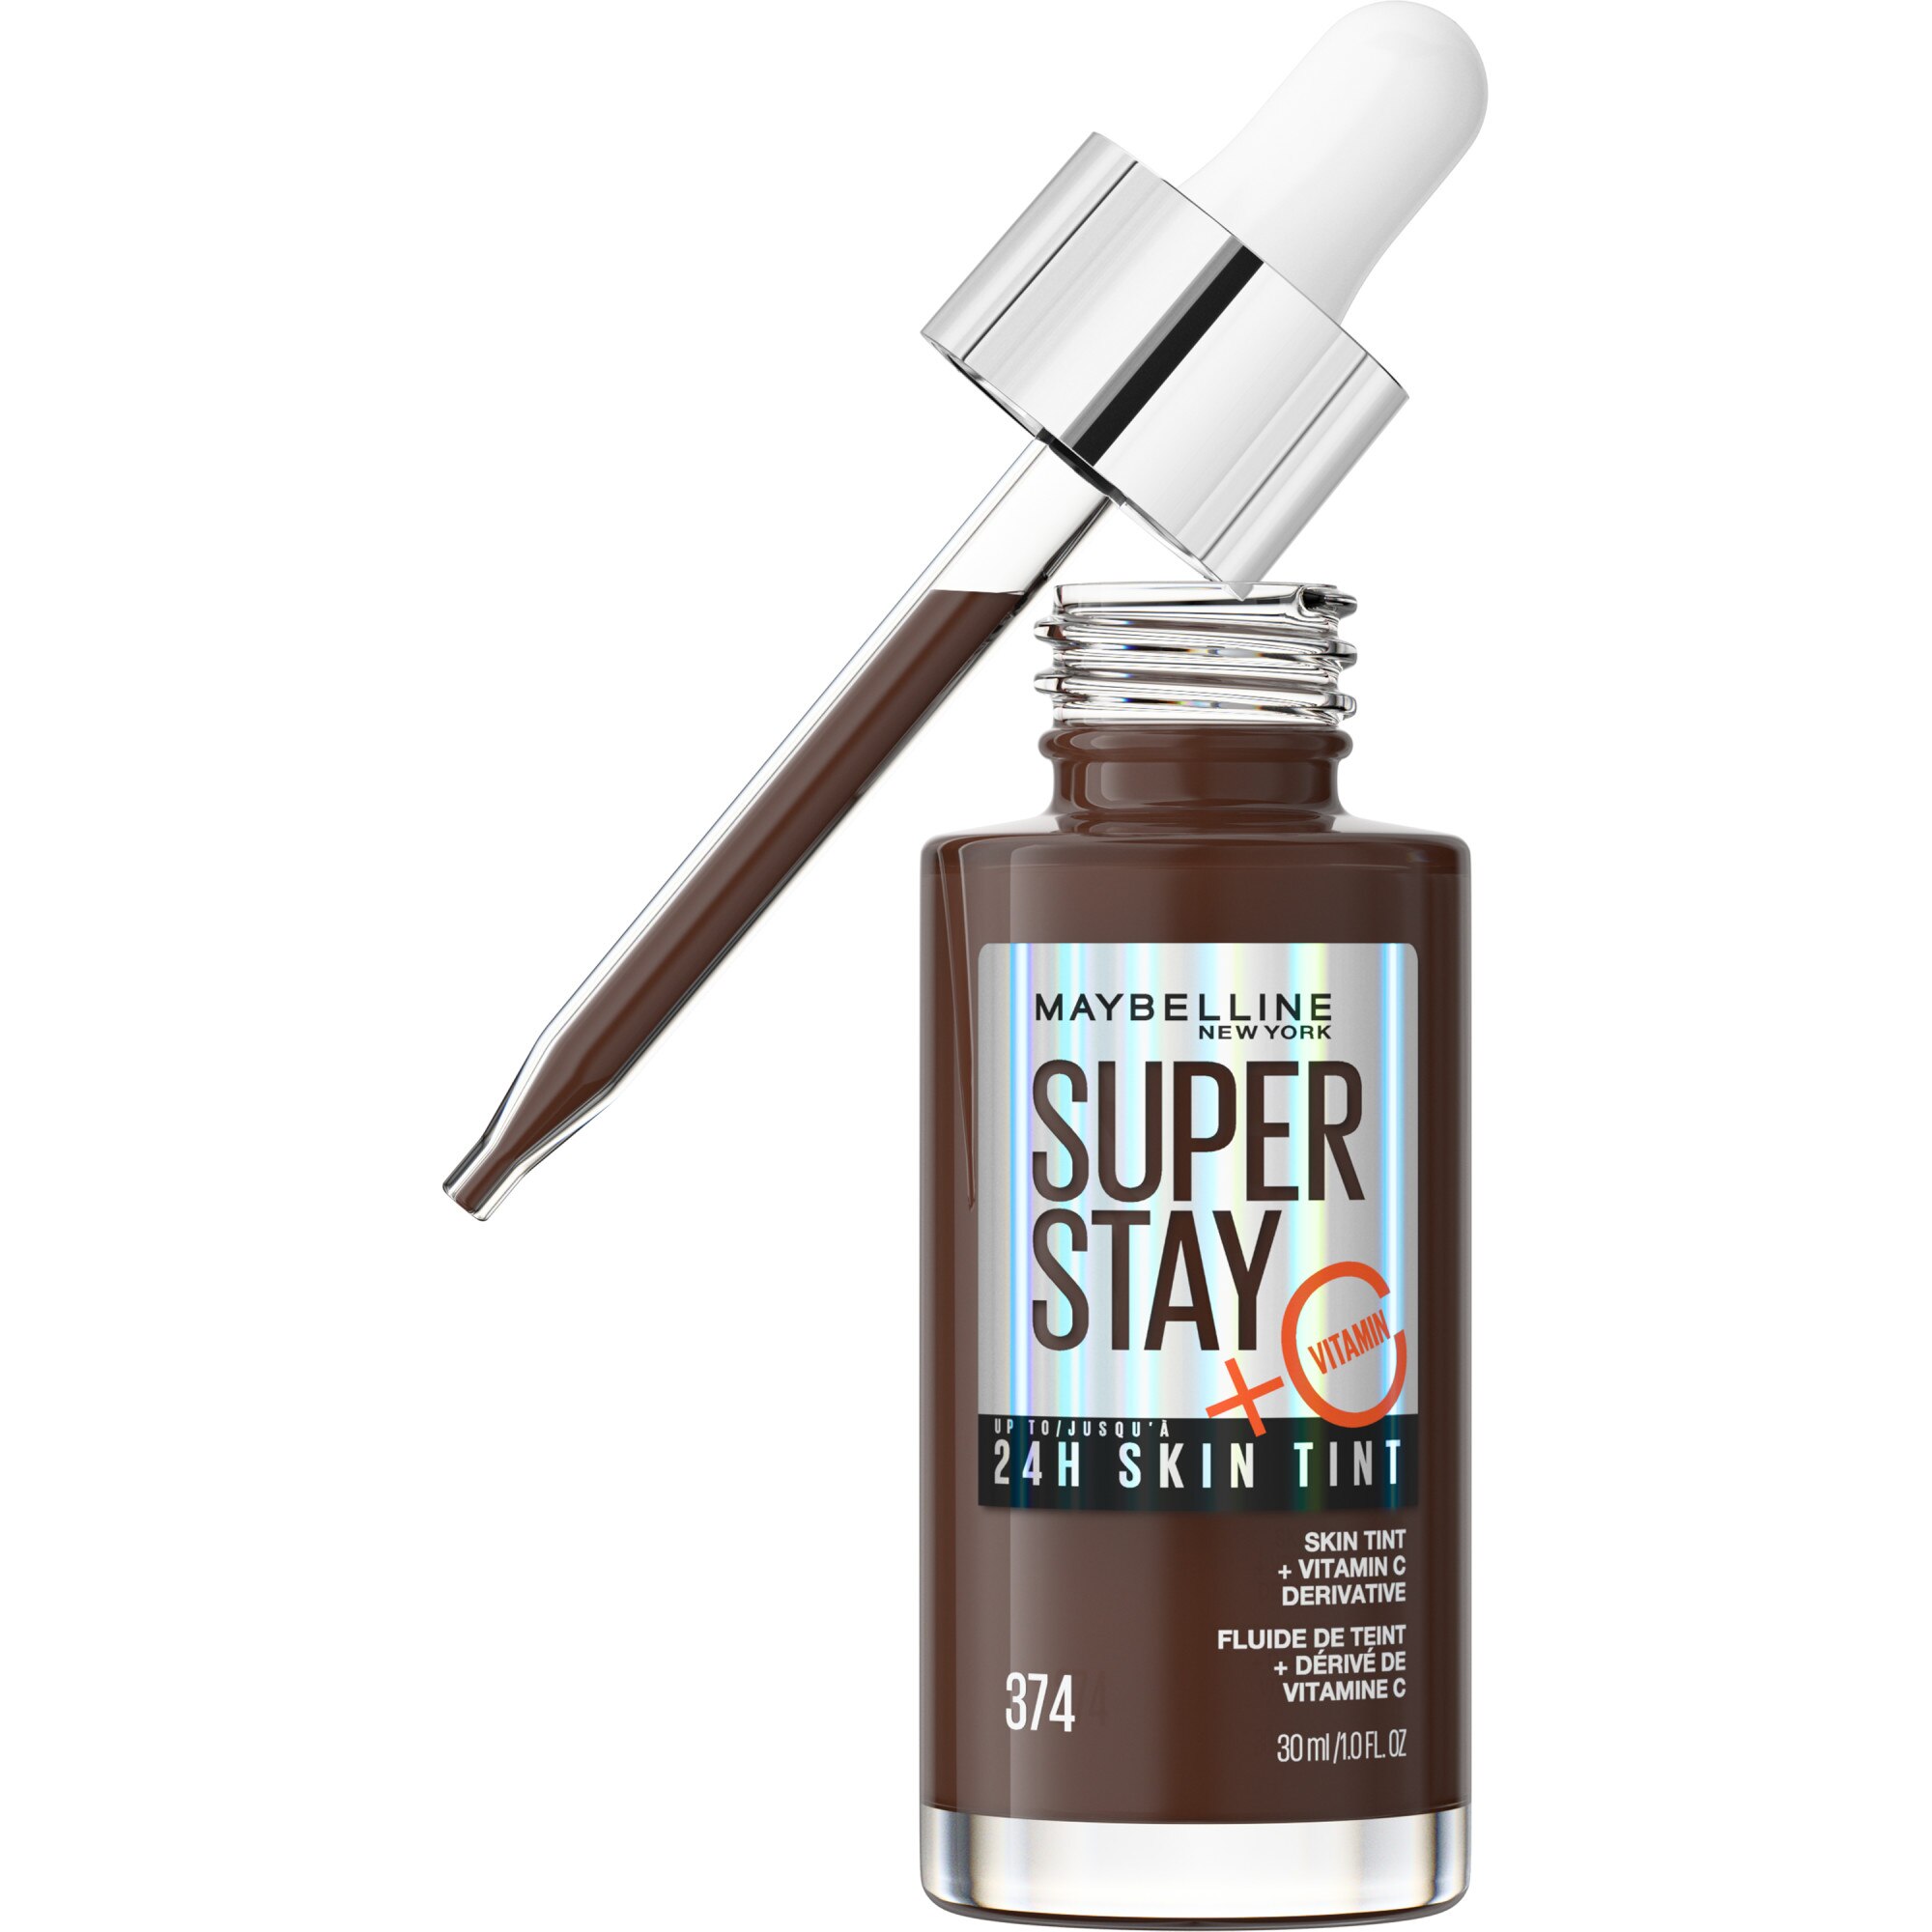 Maybelline New York Super Stay Up To 24HR Skin Tint With Vitamin C, 374, 1 Oz , CVS